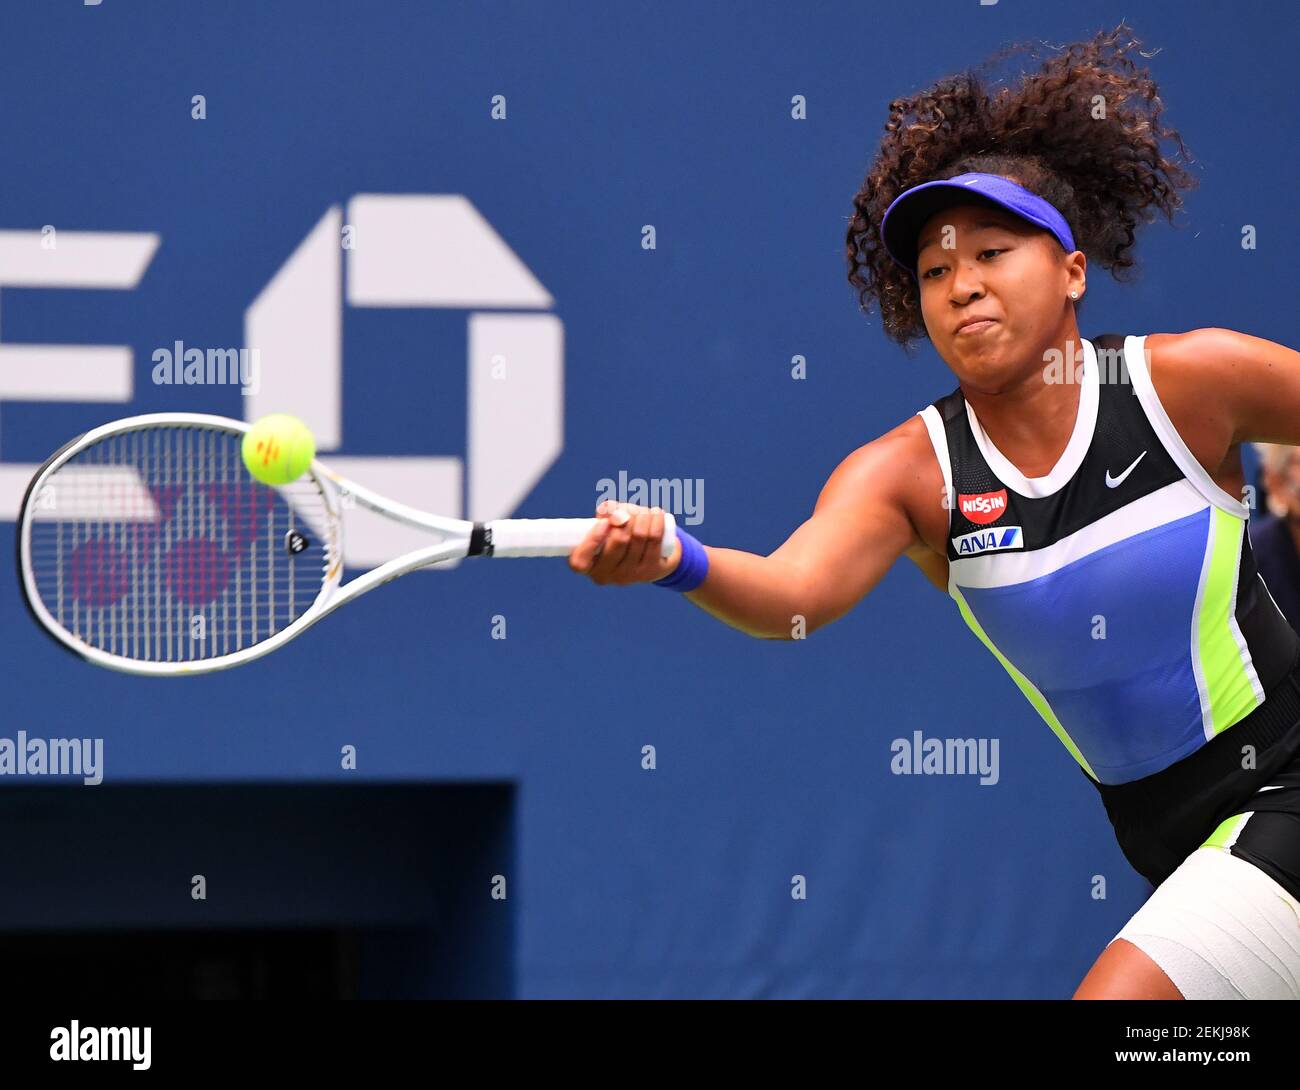 Sep 12, 2020; Flushing Meadows, New York, USA; Naomi Osaka of Japan hits  the ball against Victoria Azarenka of Belarus in the women's singles final  match on day 13 of the 2020